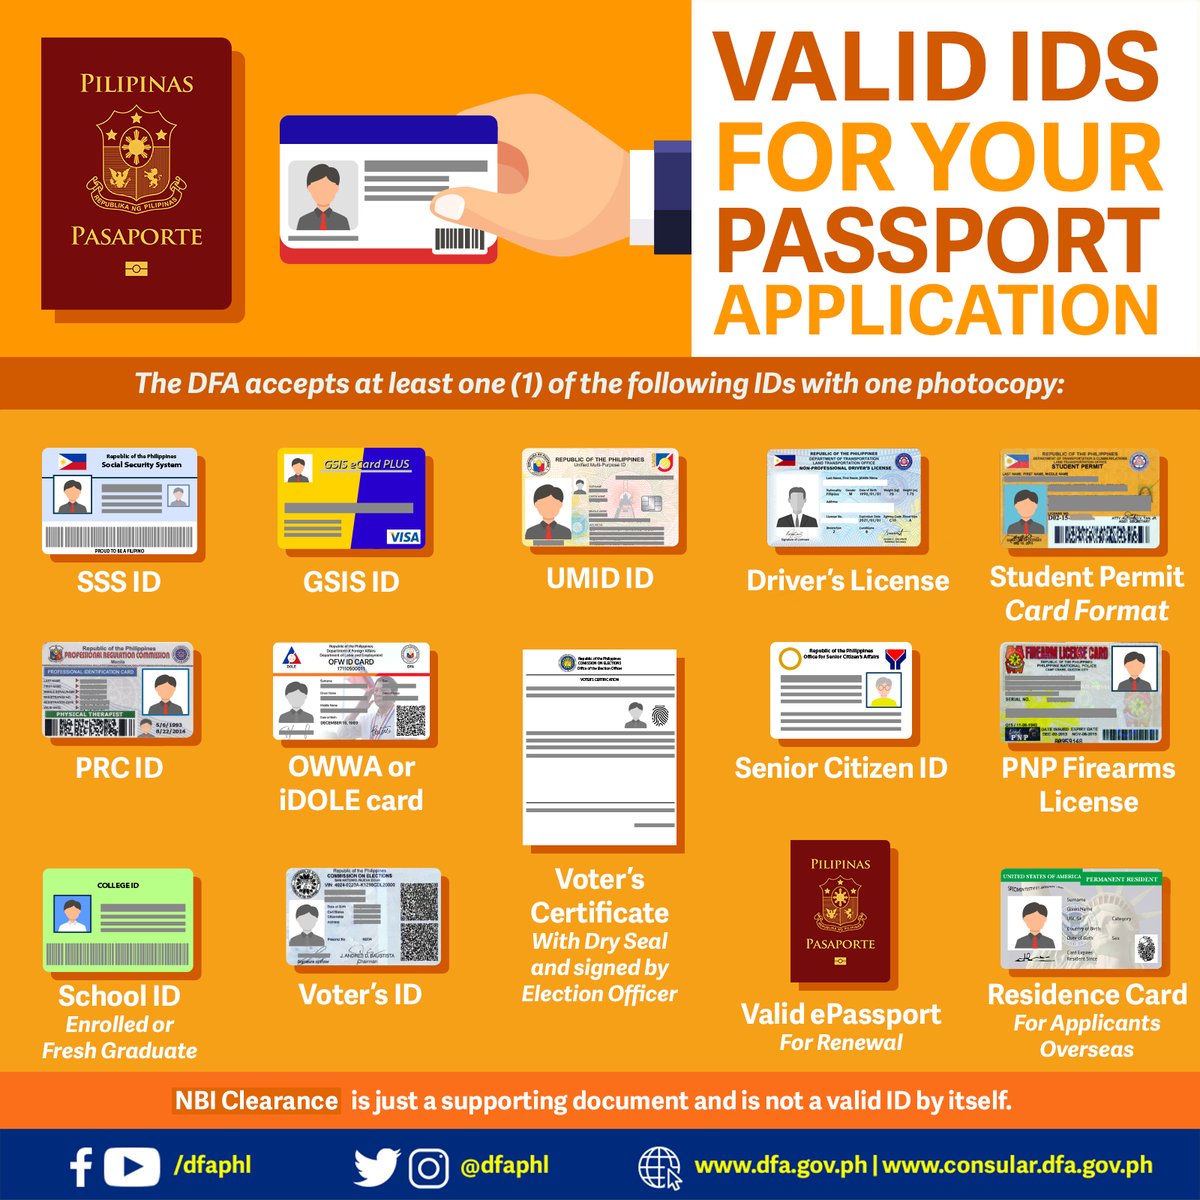 Valid IDs for Passport Application. Photo from DFA